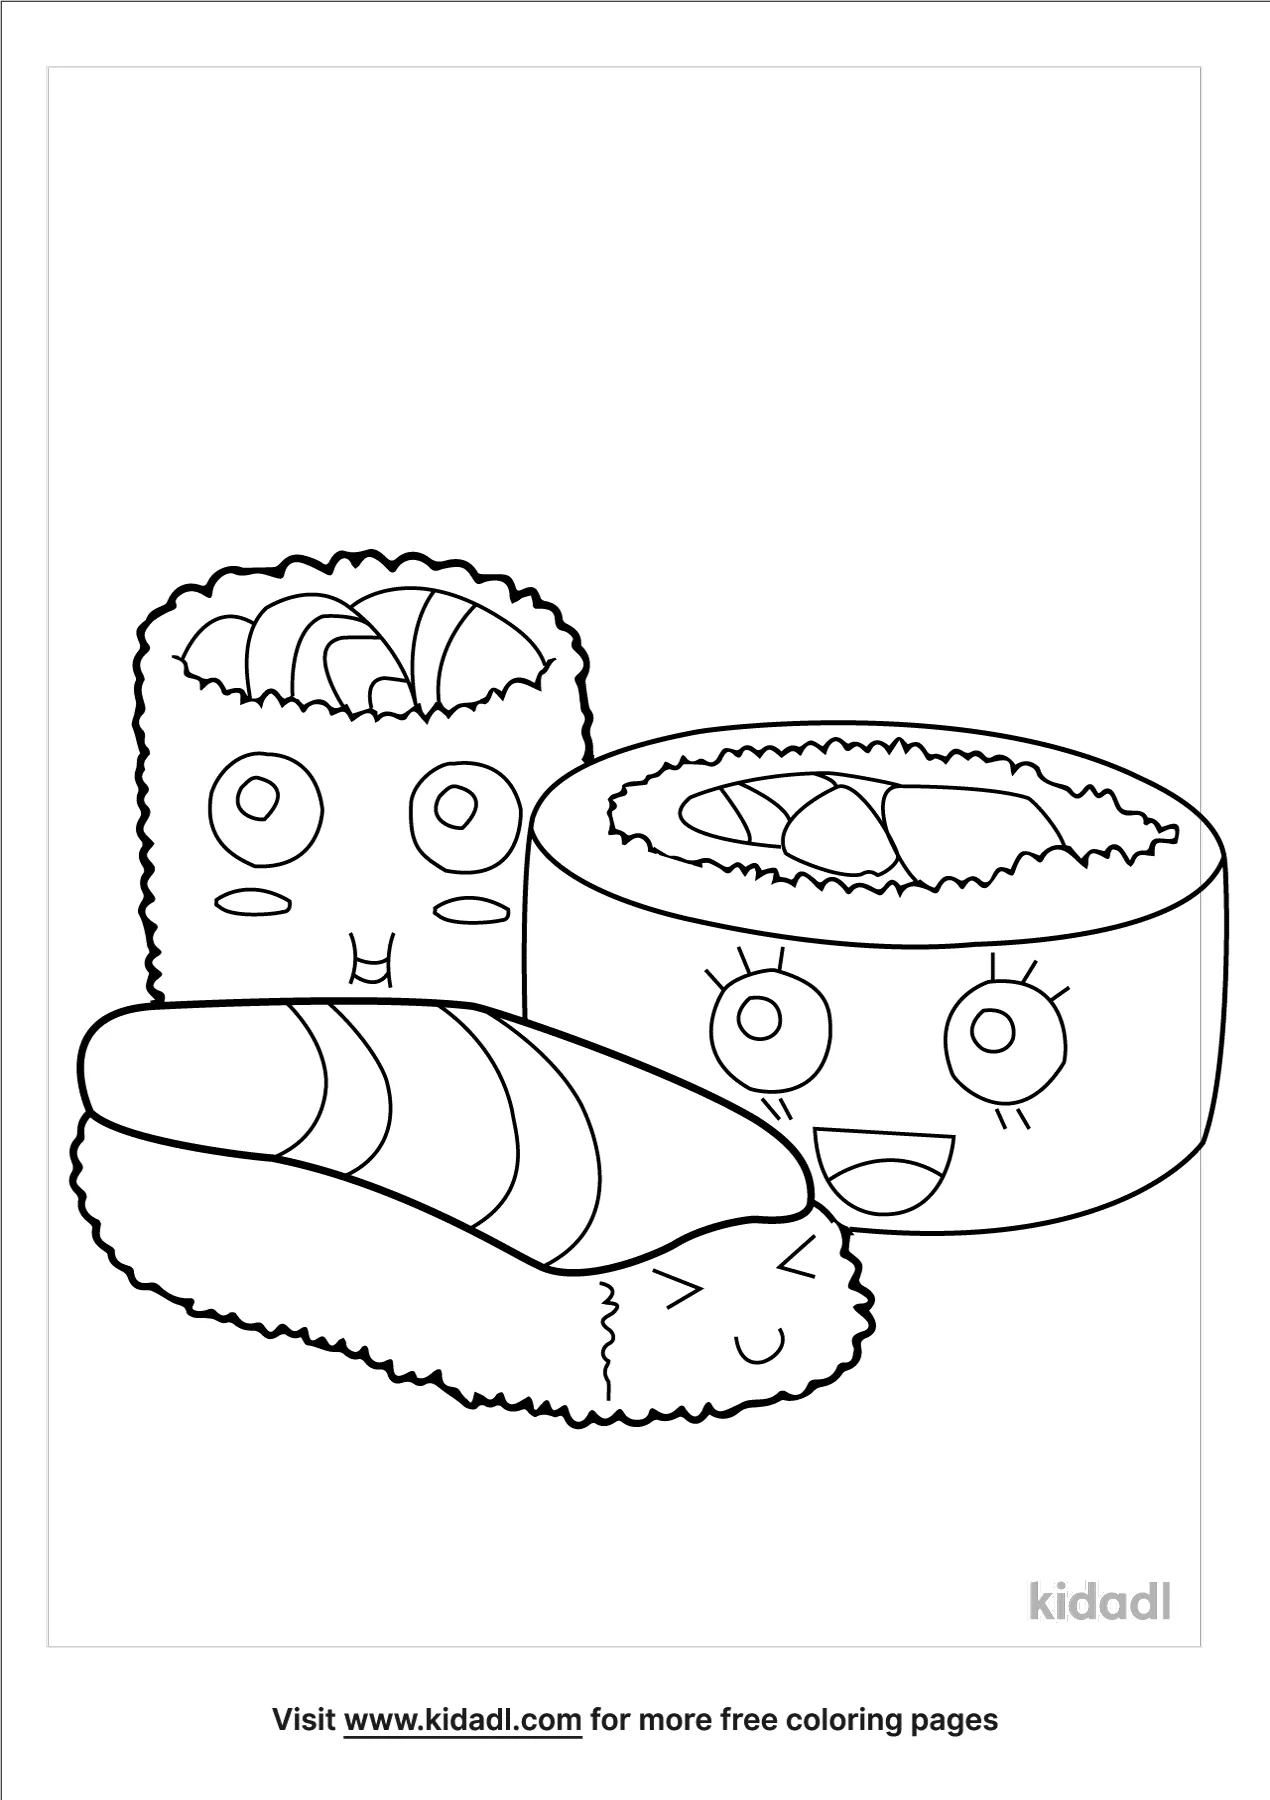 Cute Sushi Coloring Page | Free Cartoons Coloring Page | Kidadl